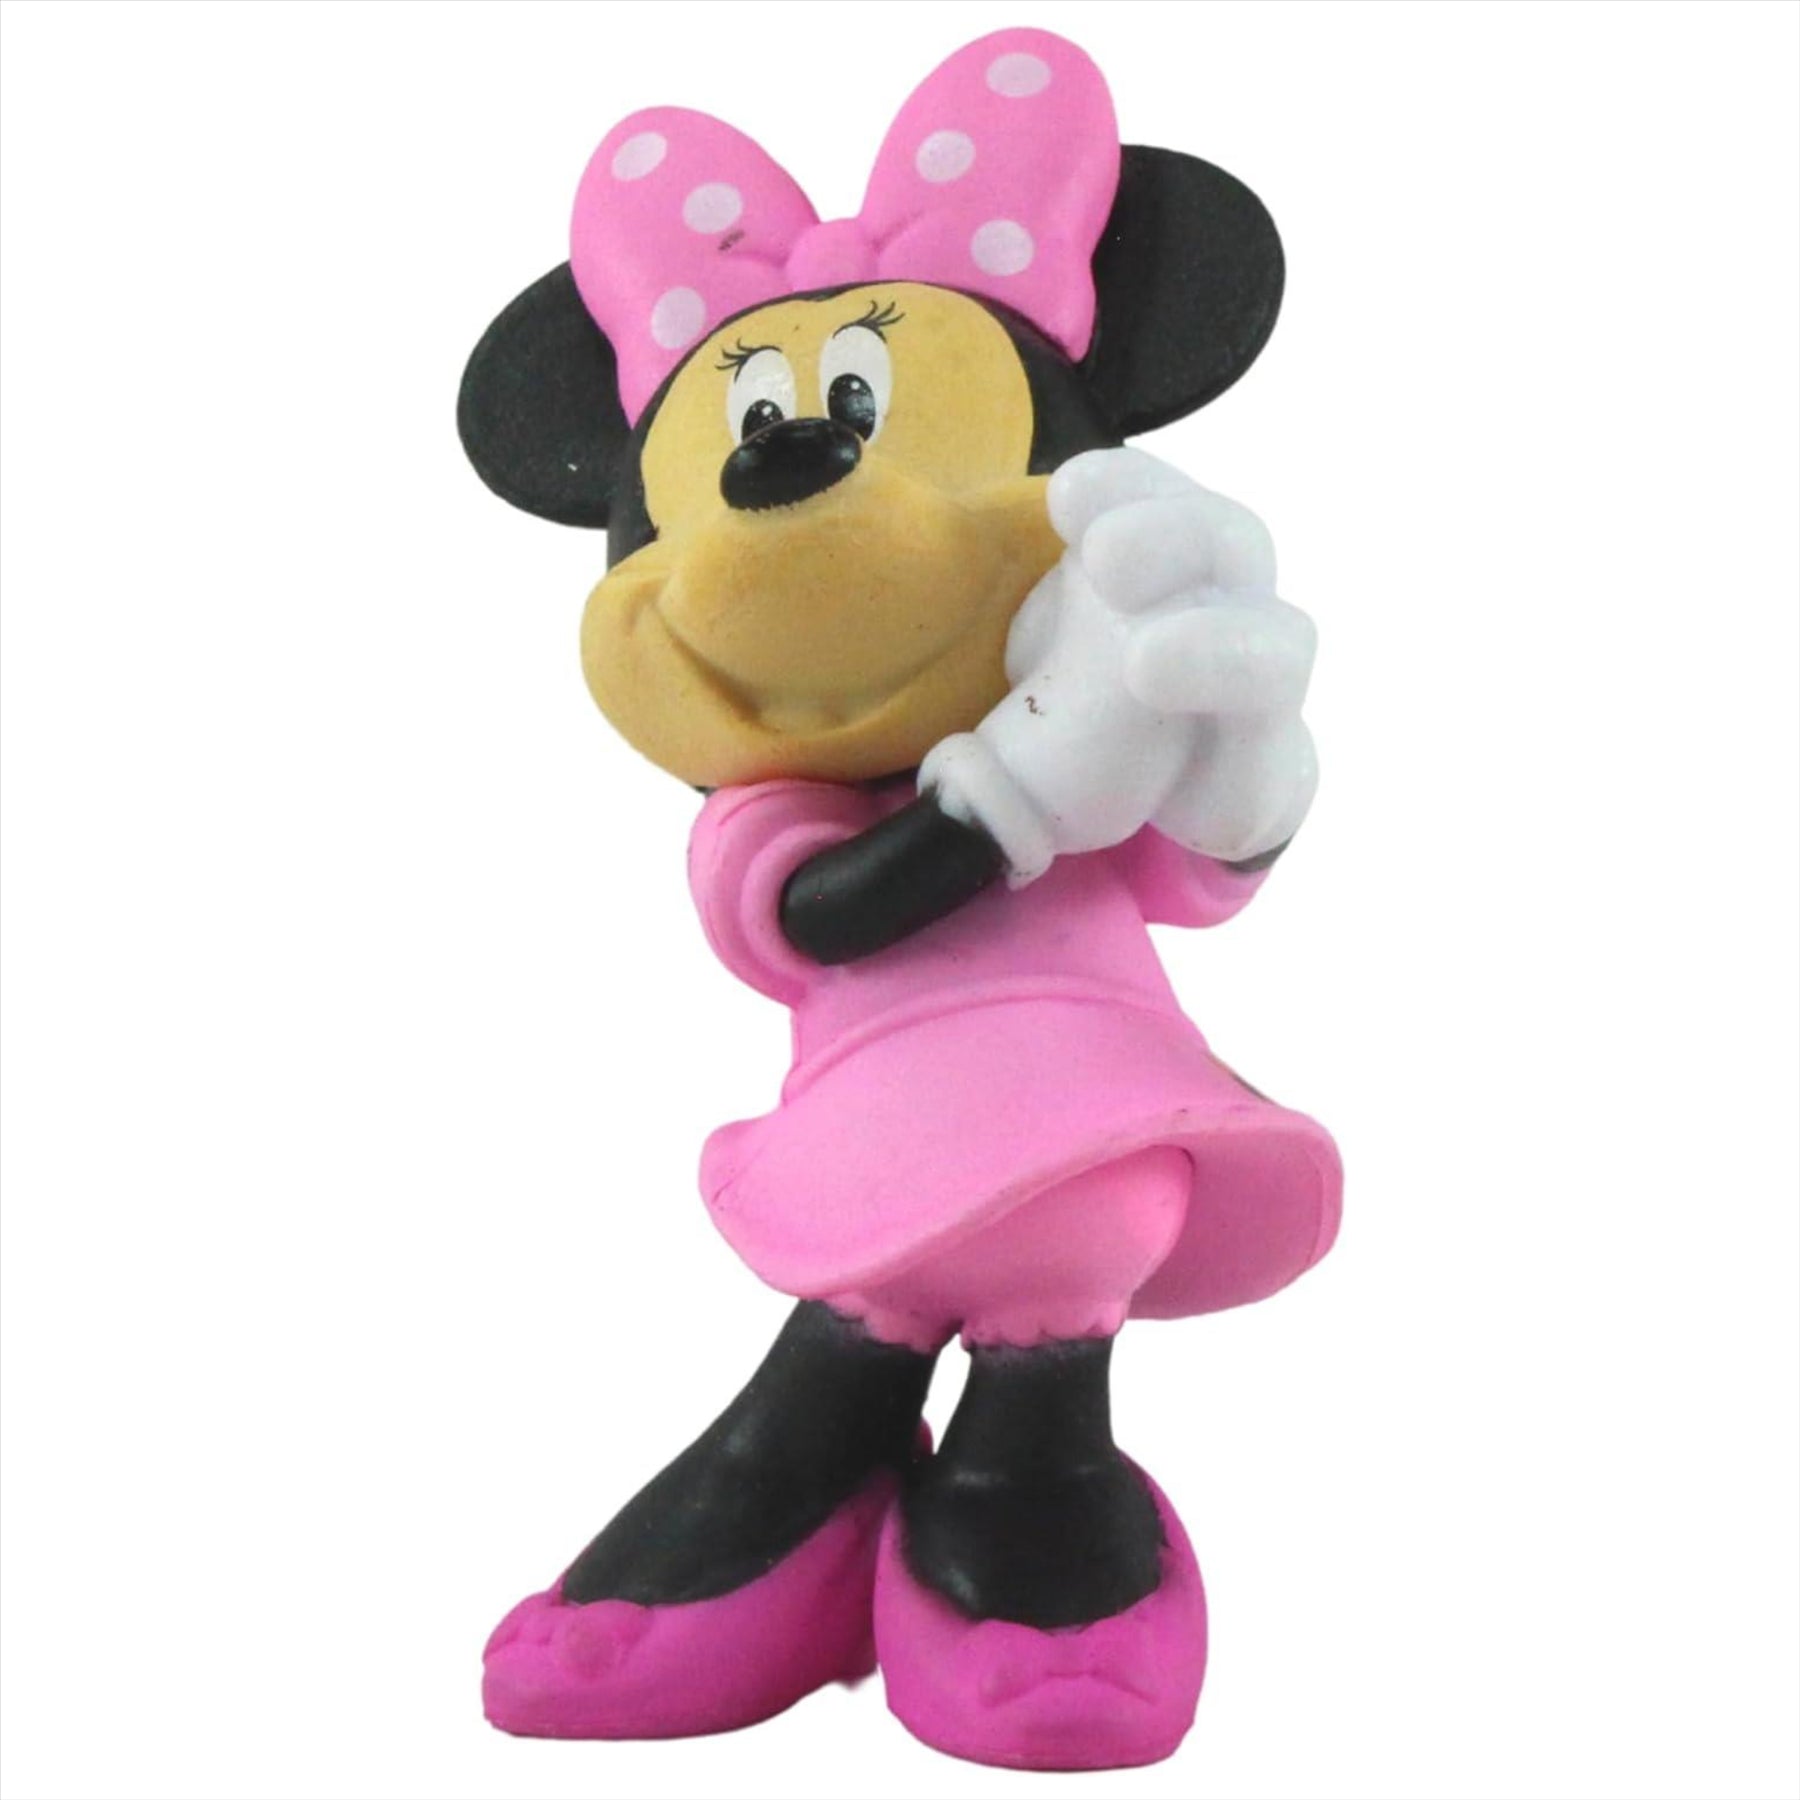 Mickey and Friends 5 Pack 2.5" 6cm Figures - Highly Detailed Collectible Miniature Figures Perfect as Cake Toppers - Minnie, Mickey 2 Poses, Pluto, Donald - Toptoys2u